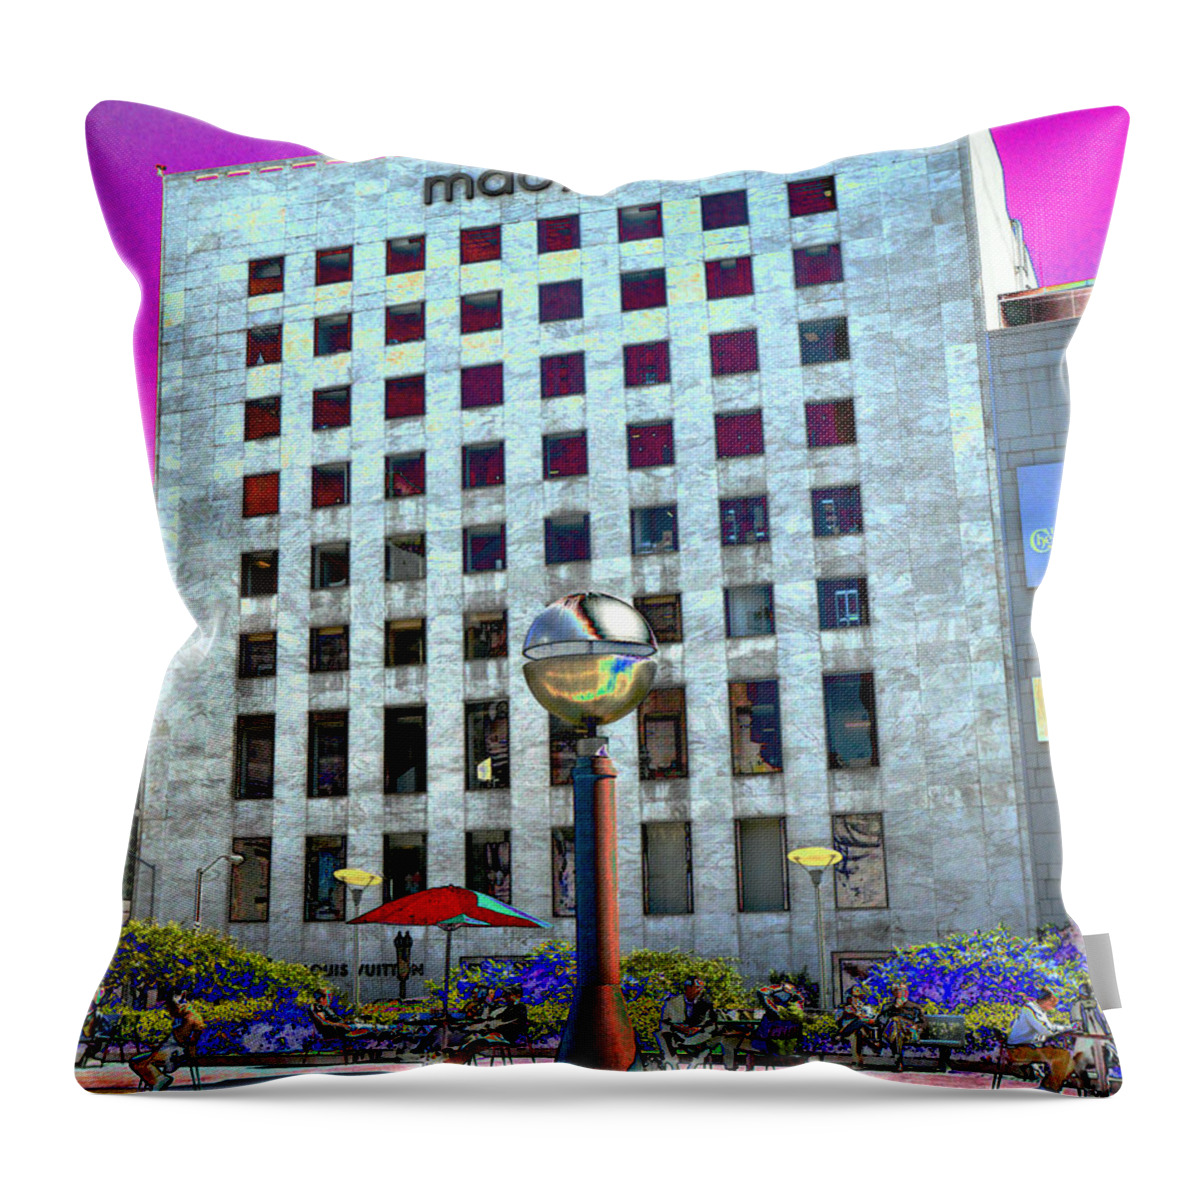 Macy's Throw Pillow featuring the photograph Macy's by Tom Kelly